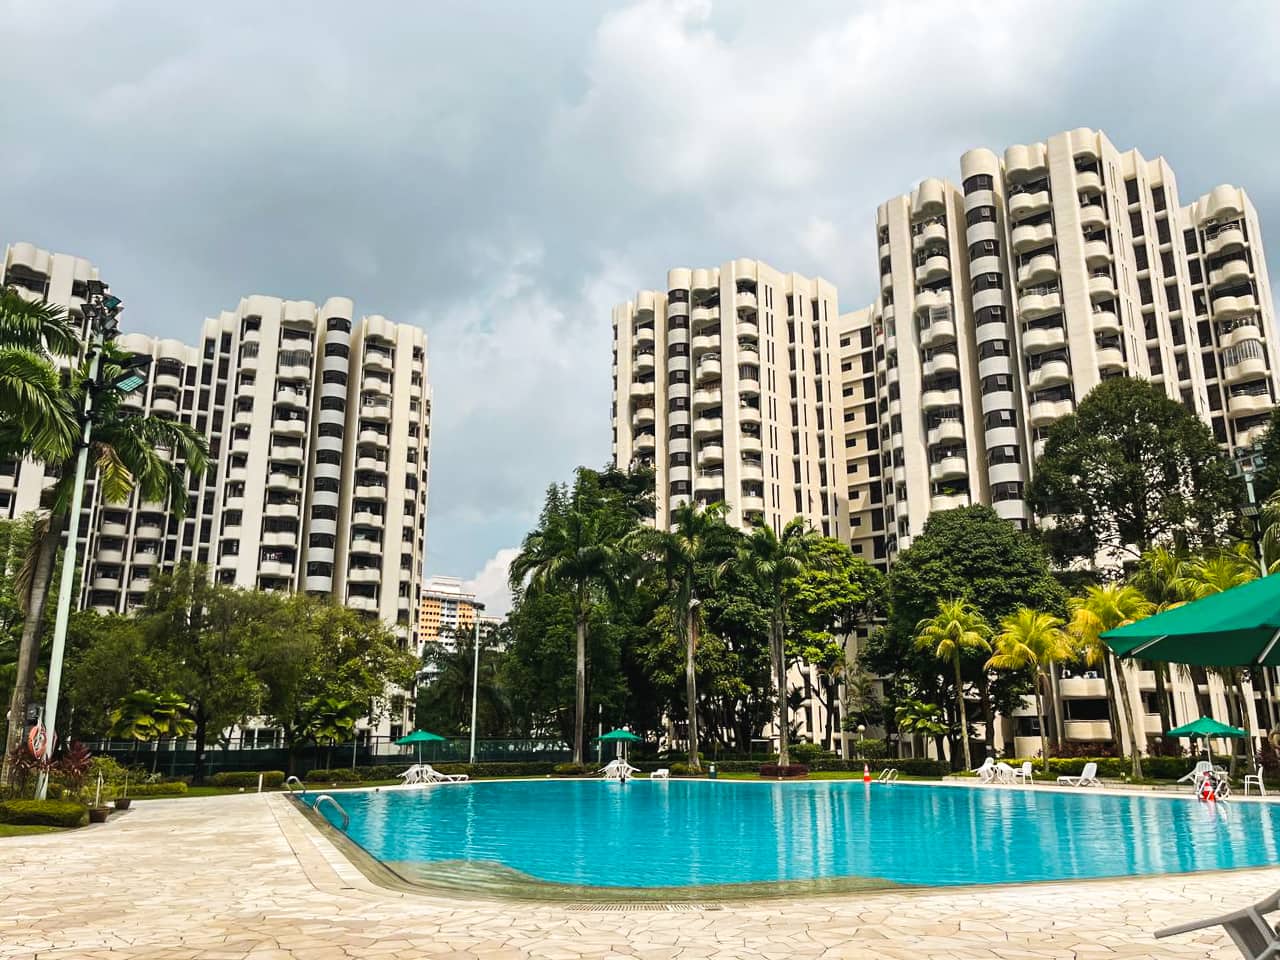 I’ve Lived At Cashew Heights At Bukit Panjang For 20 Years: Here’s My Review Of This Old But Spacious Condo